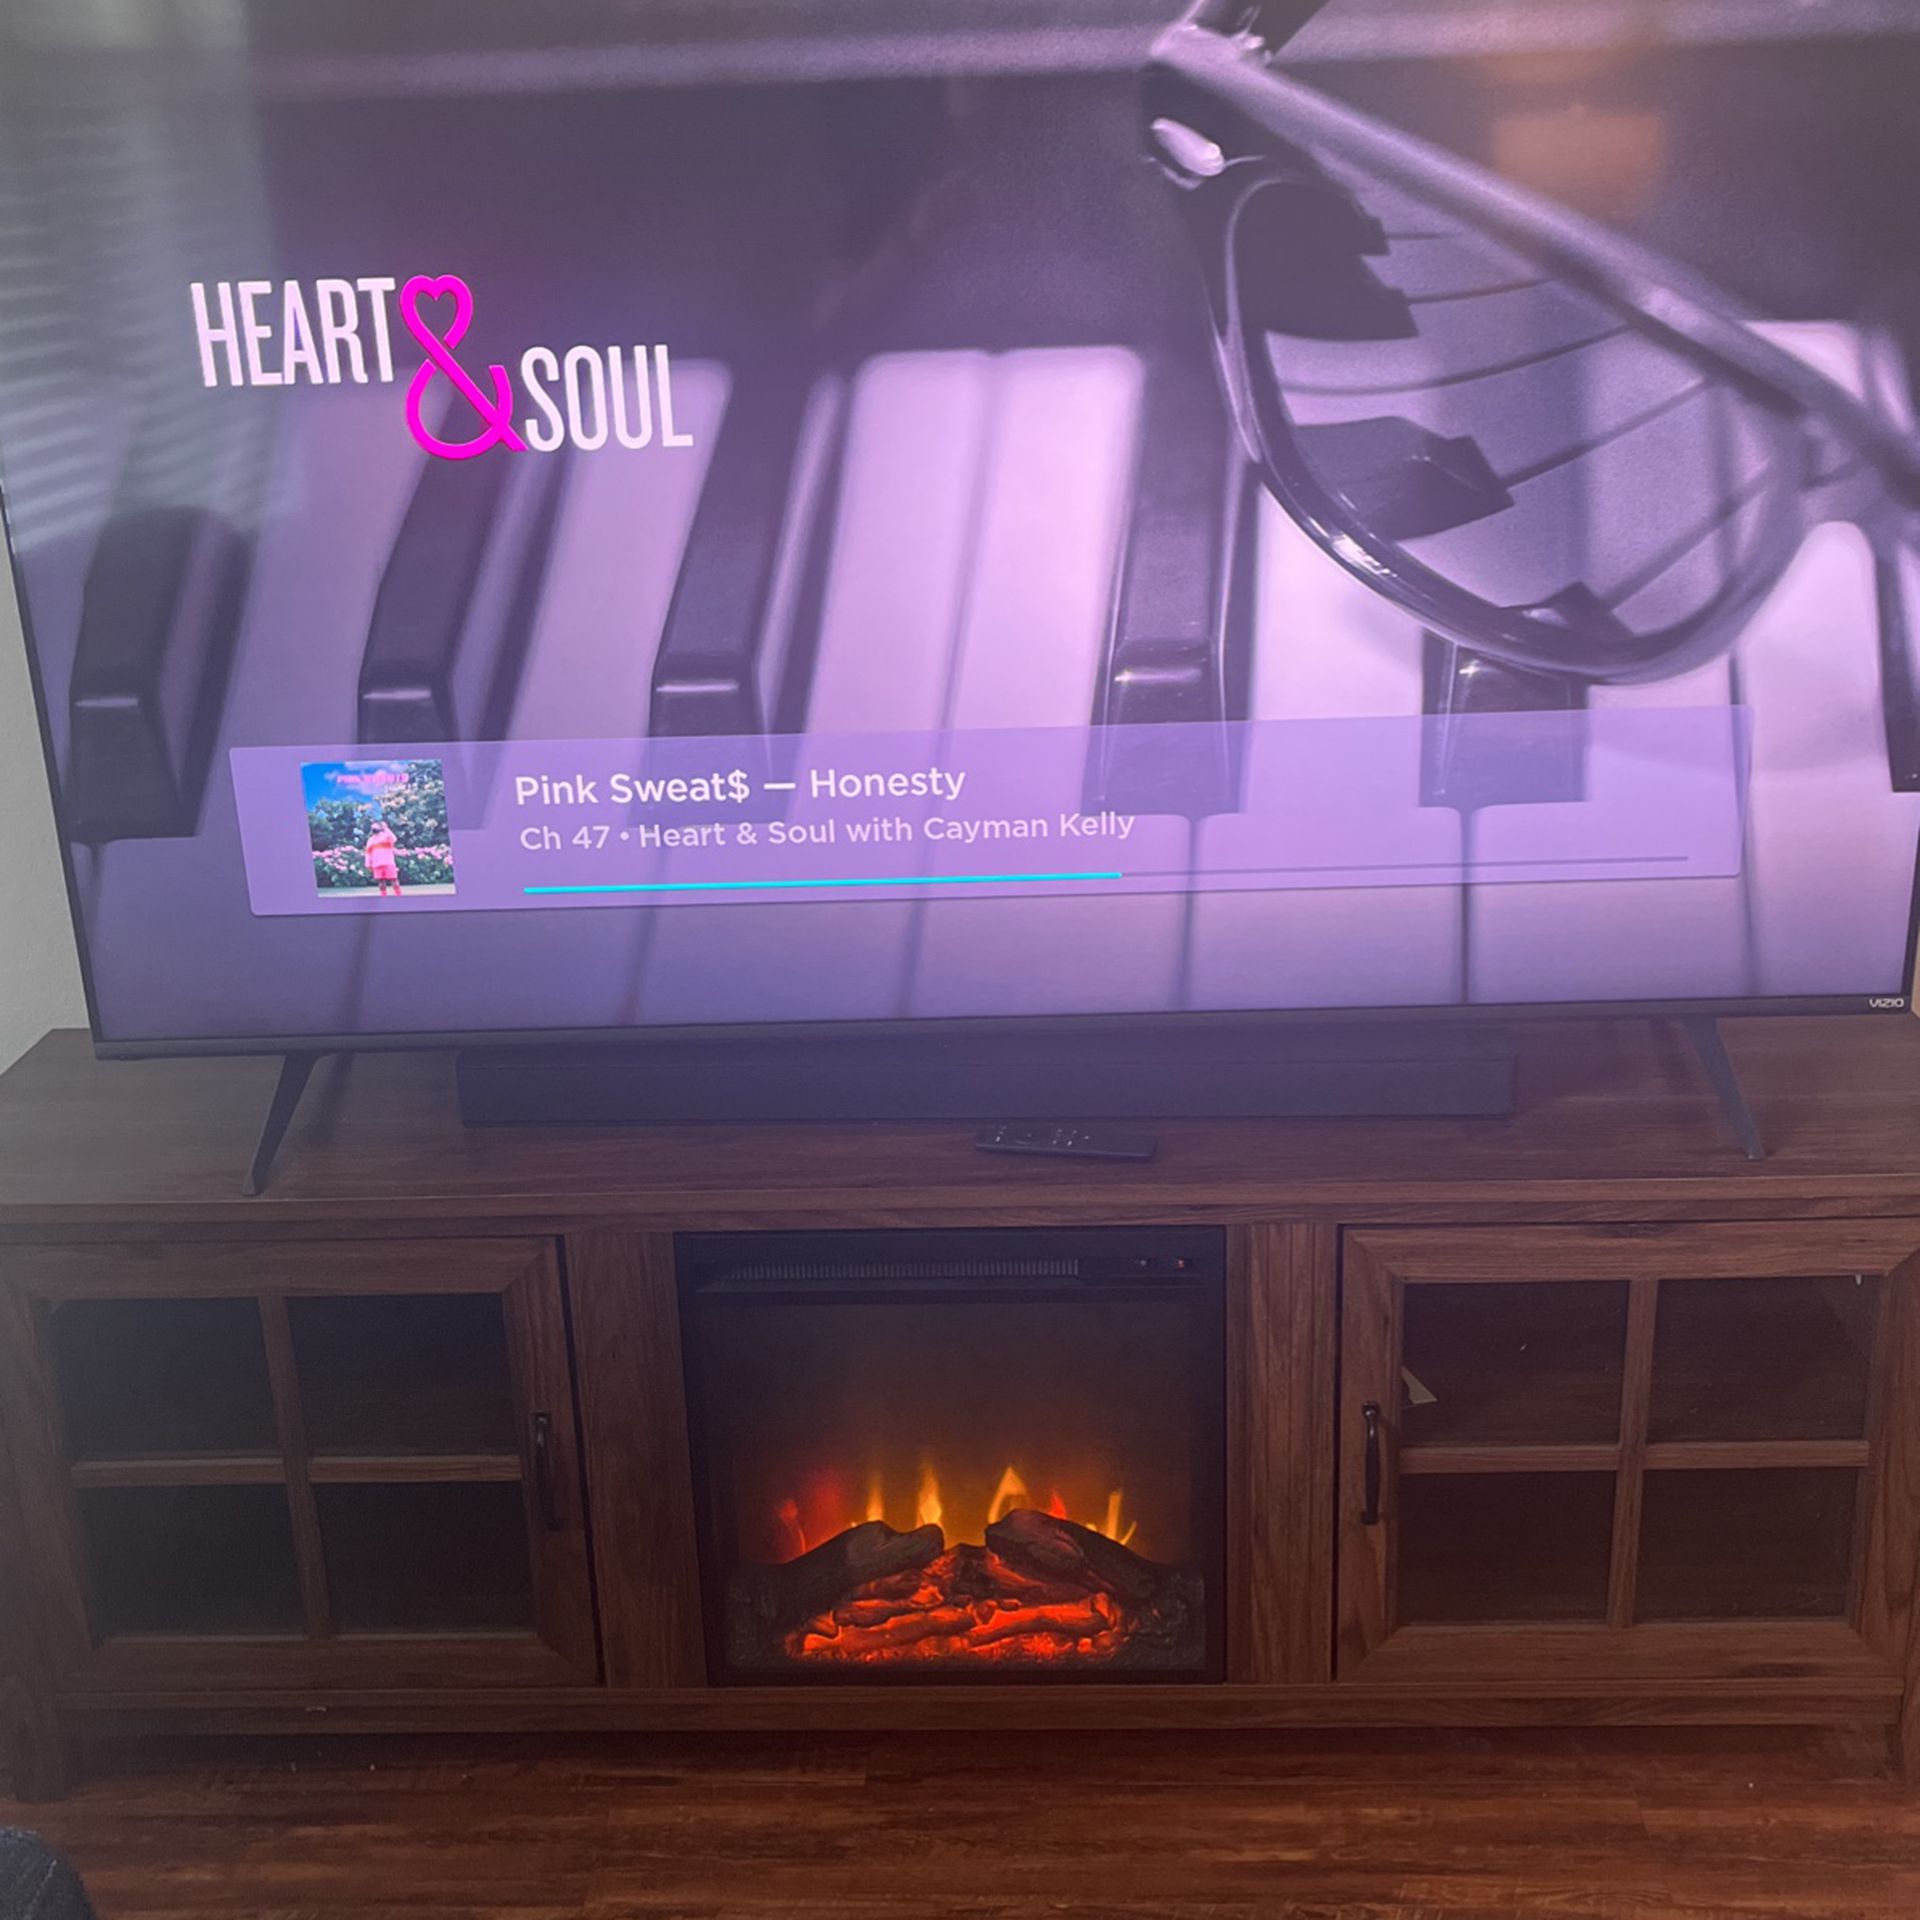 TV Stand with Electric Fire place